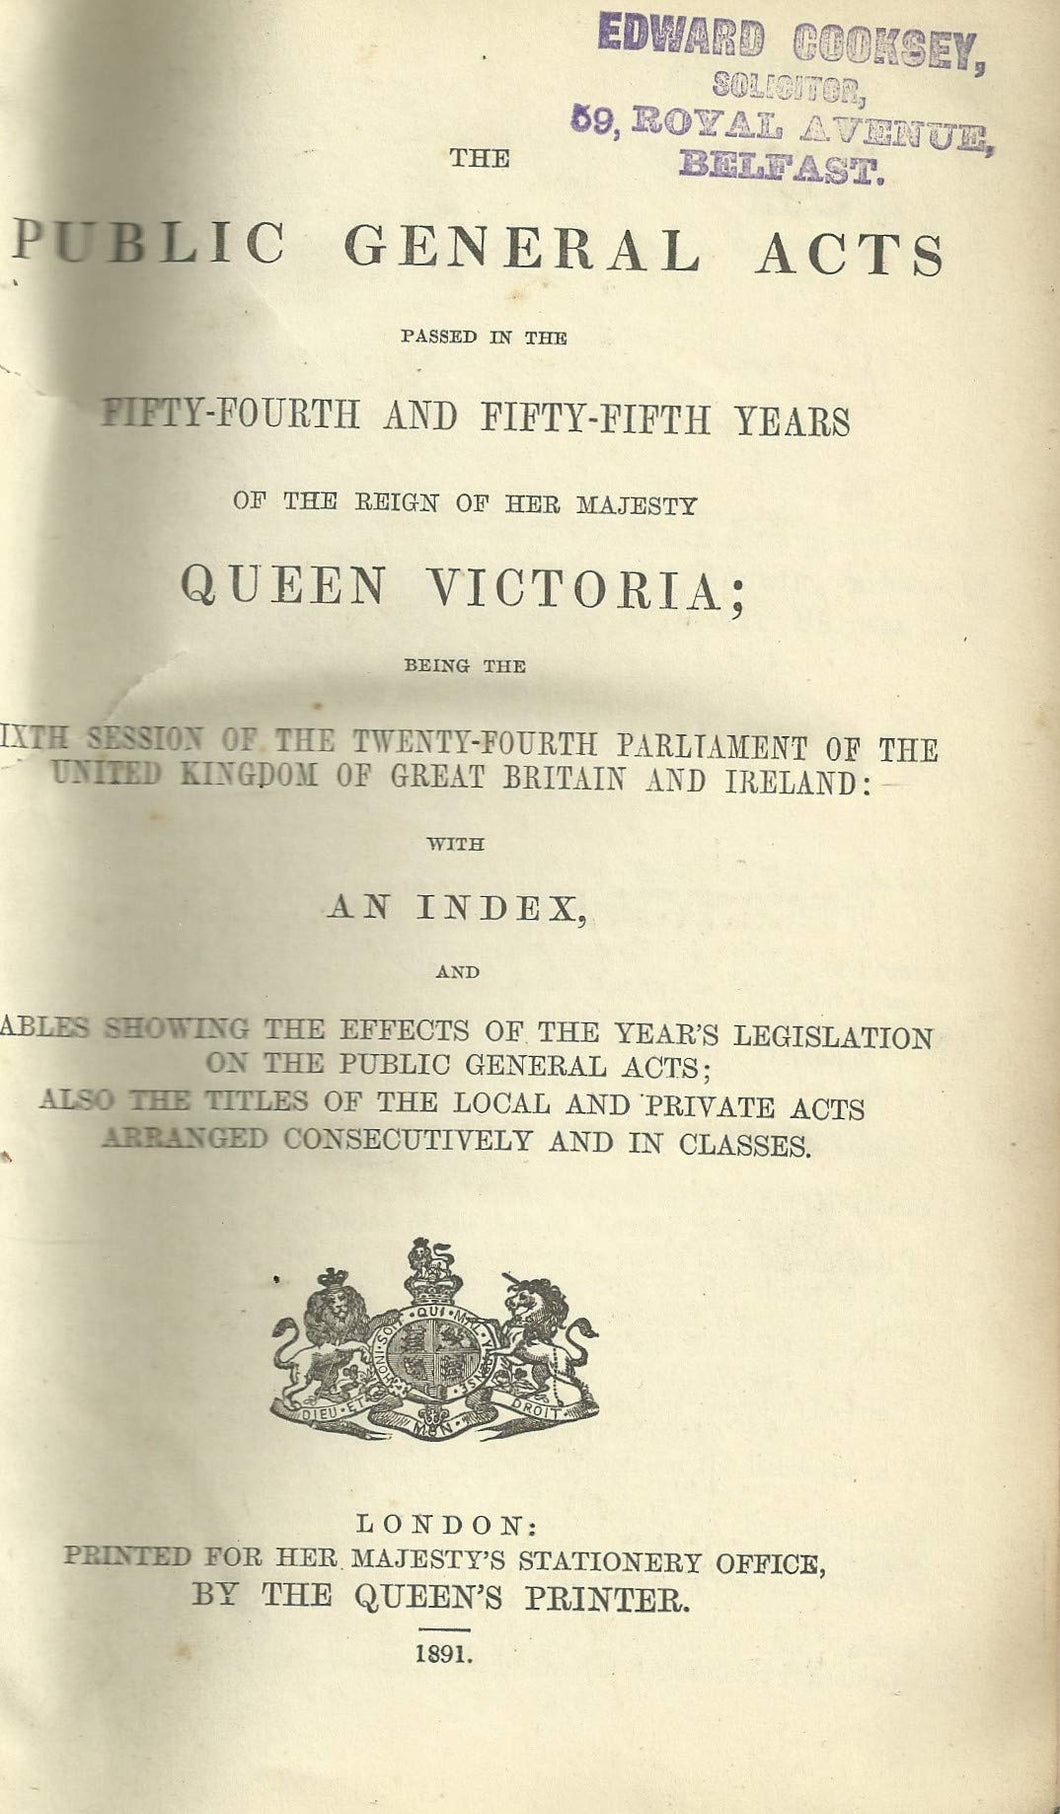 Statutes 54 and 55 Vict: The Public General Acts Passed in the Fifty-Fourth and Fifty-Fifth Years of the Reign of Her Majesty Queen Victoria